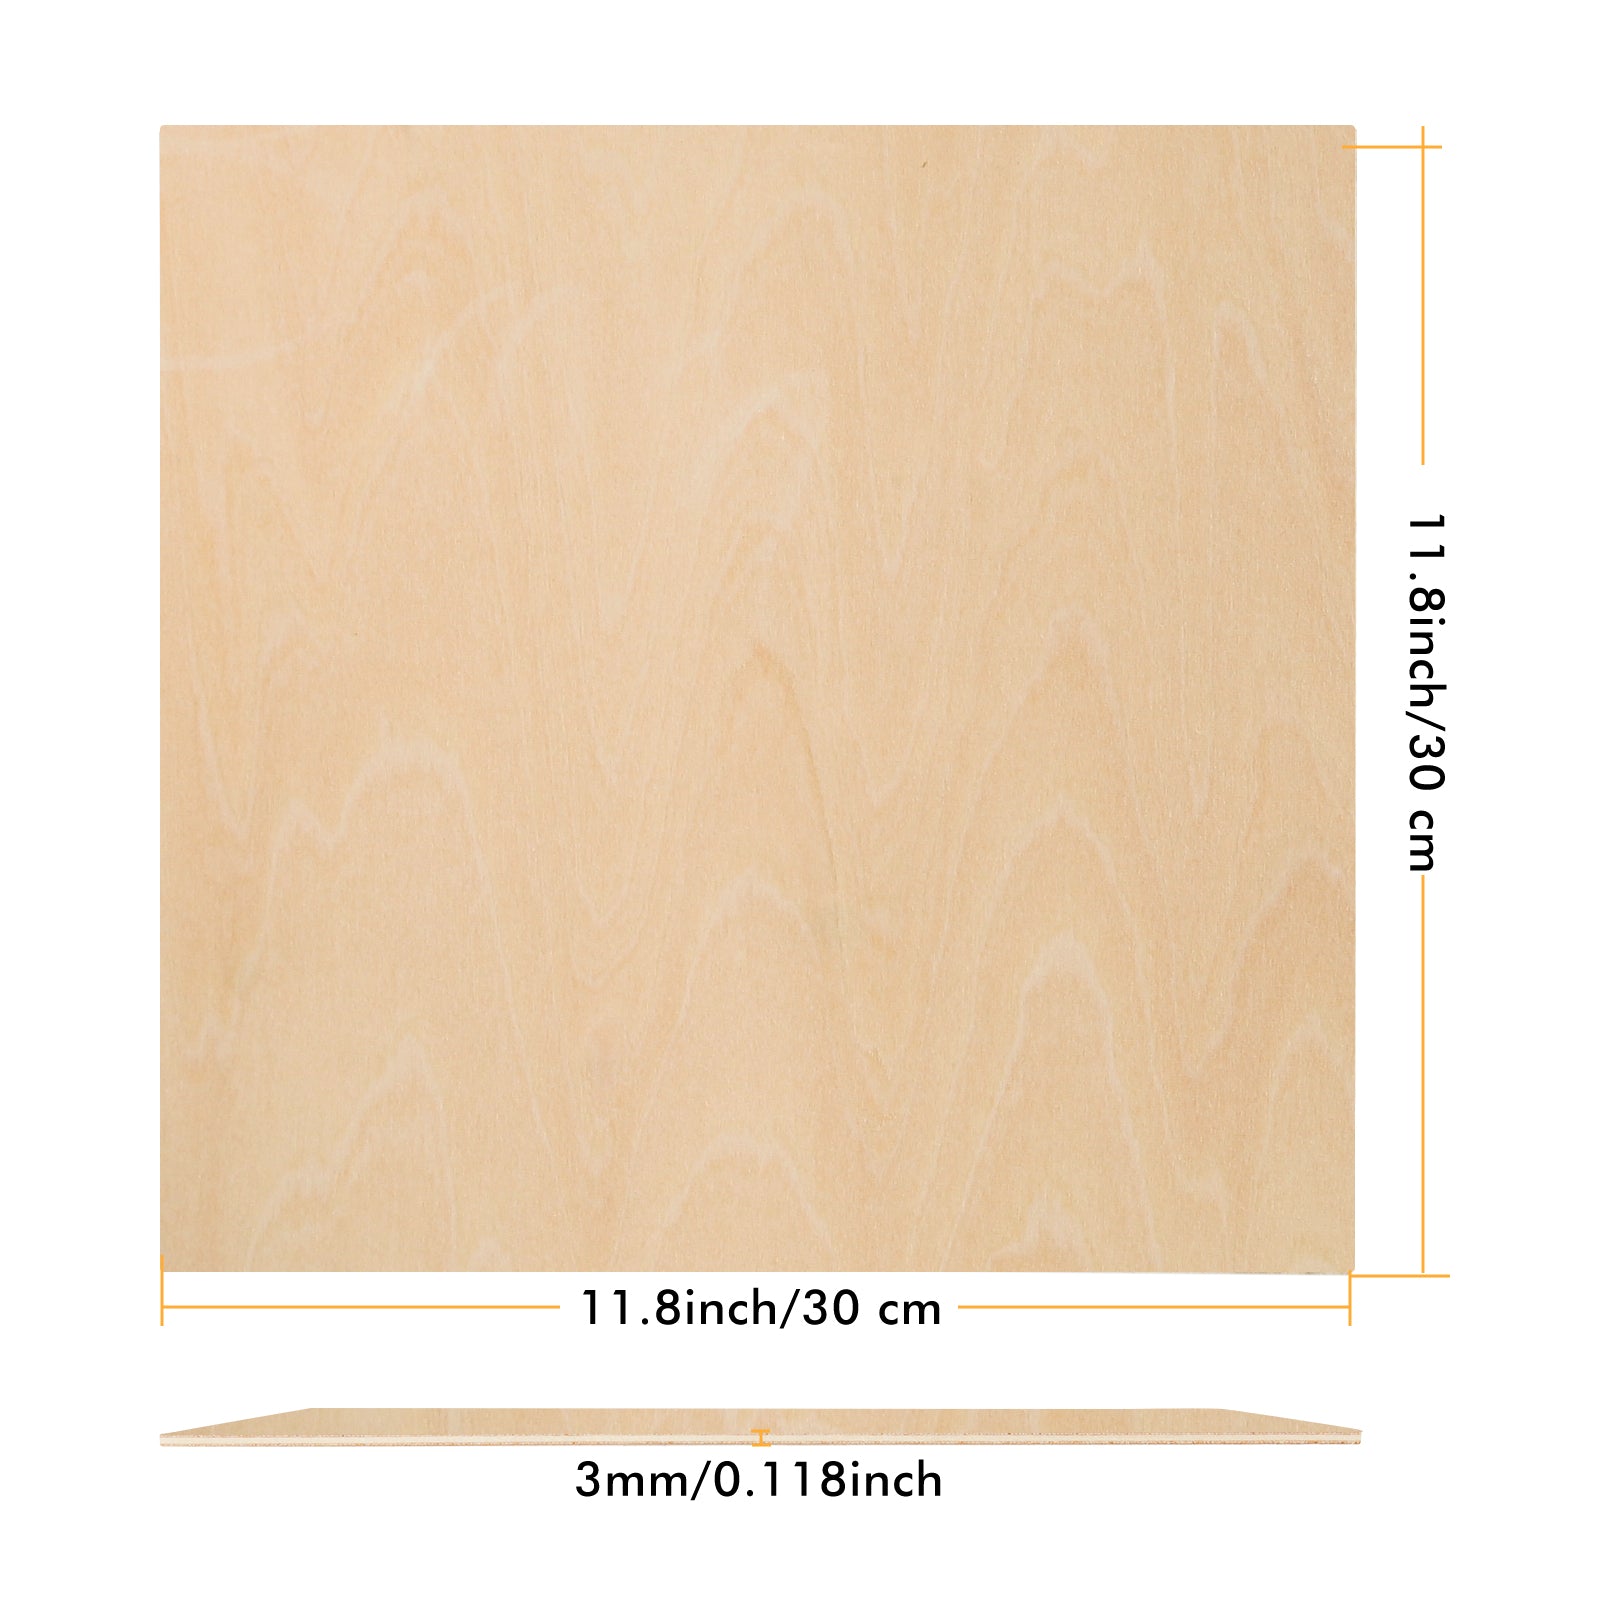 A4 Plywood Sheets 3mm Thickness (+/- 0.2mm) Basswood Plywood 11.8x11.8 inch for Engraving - CREATORALLY